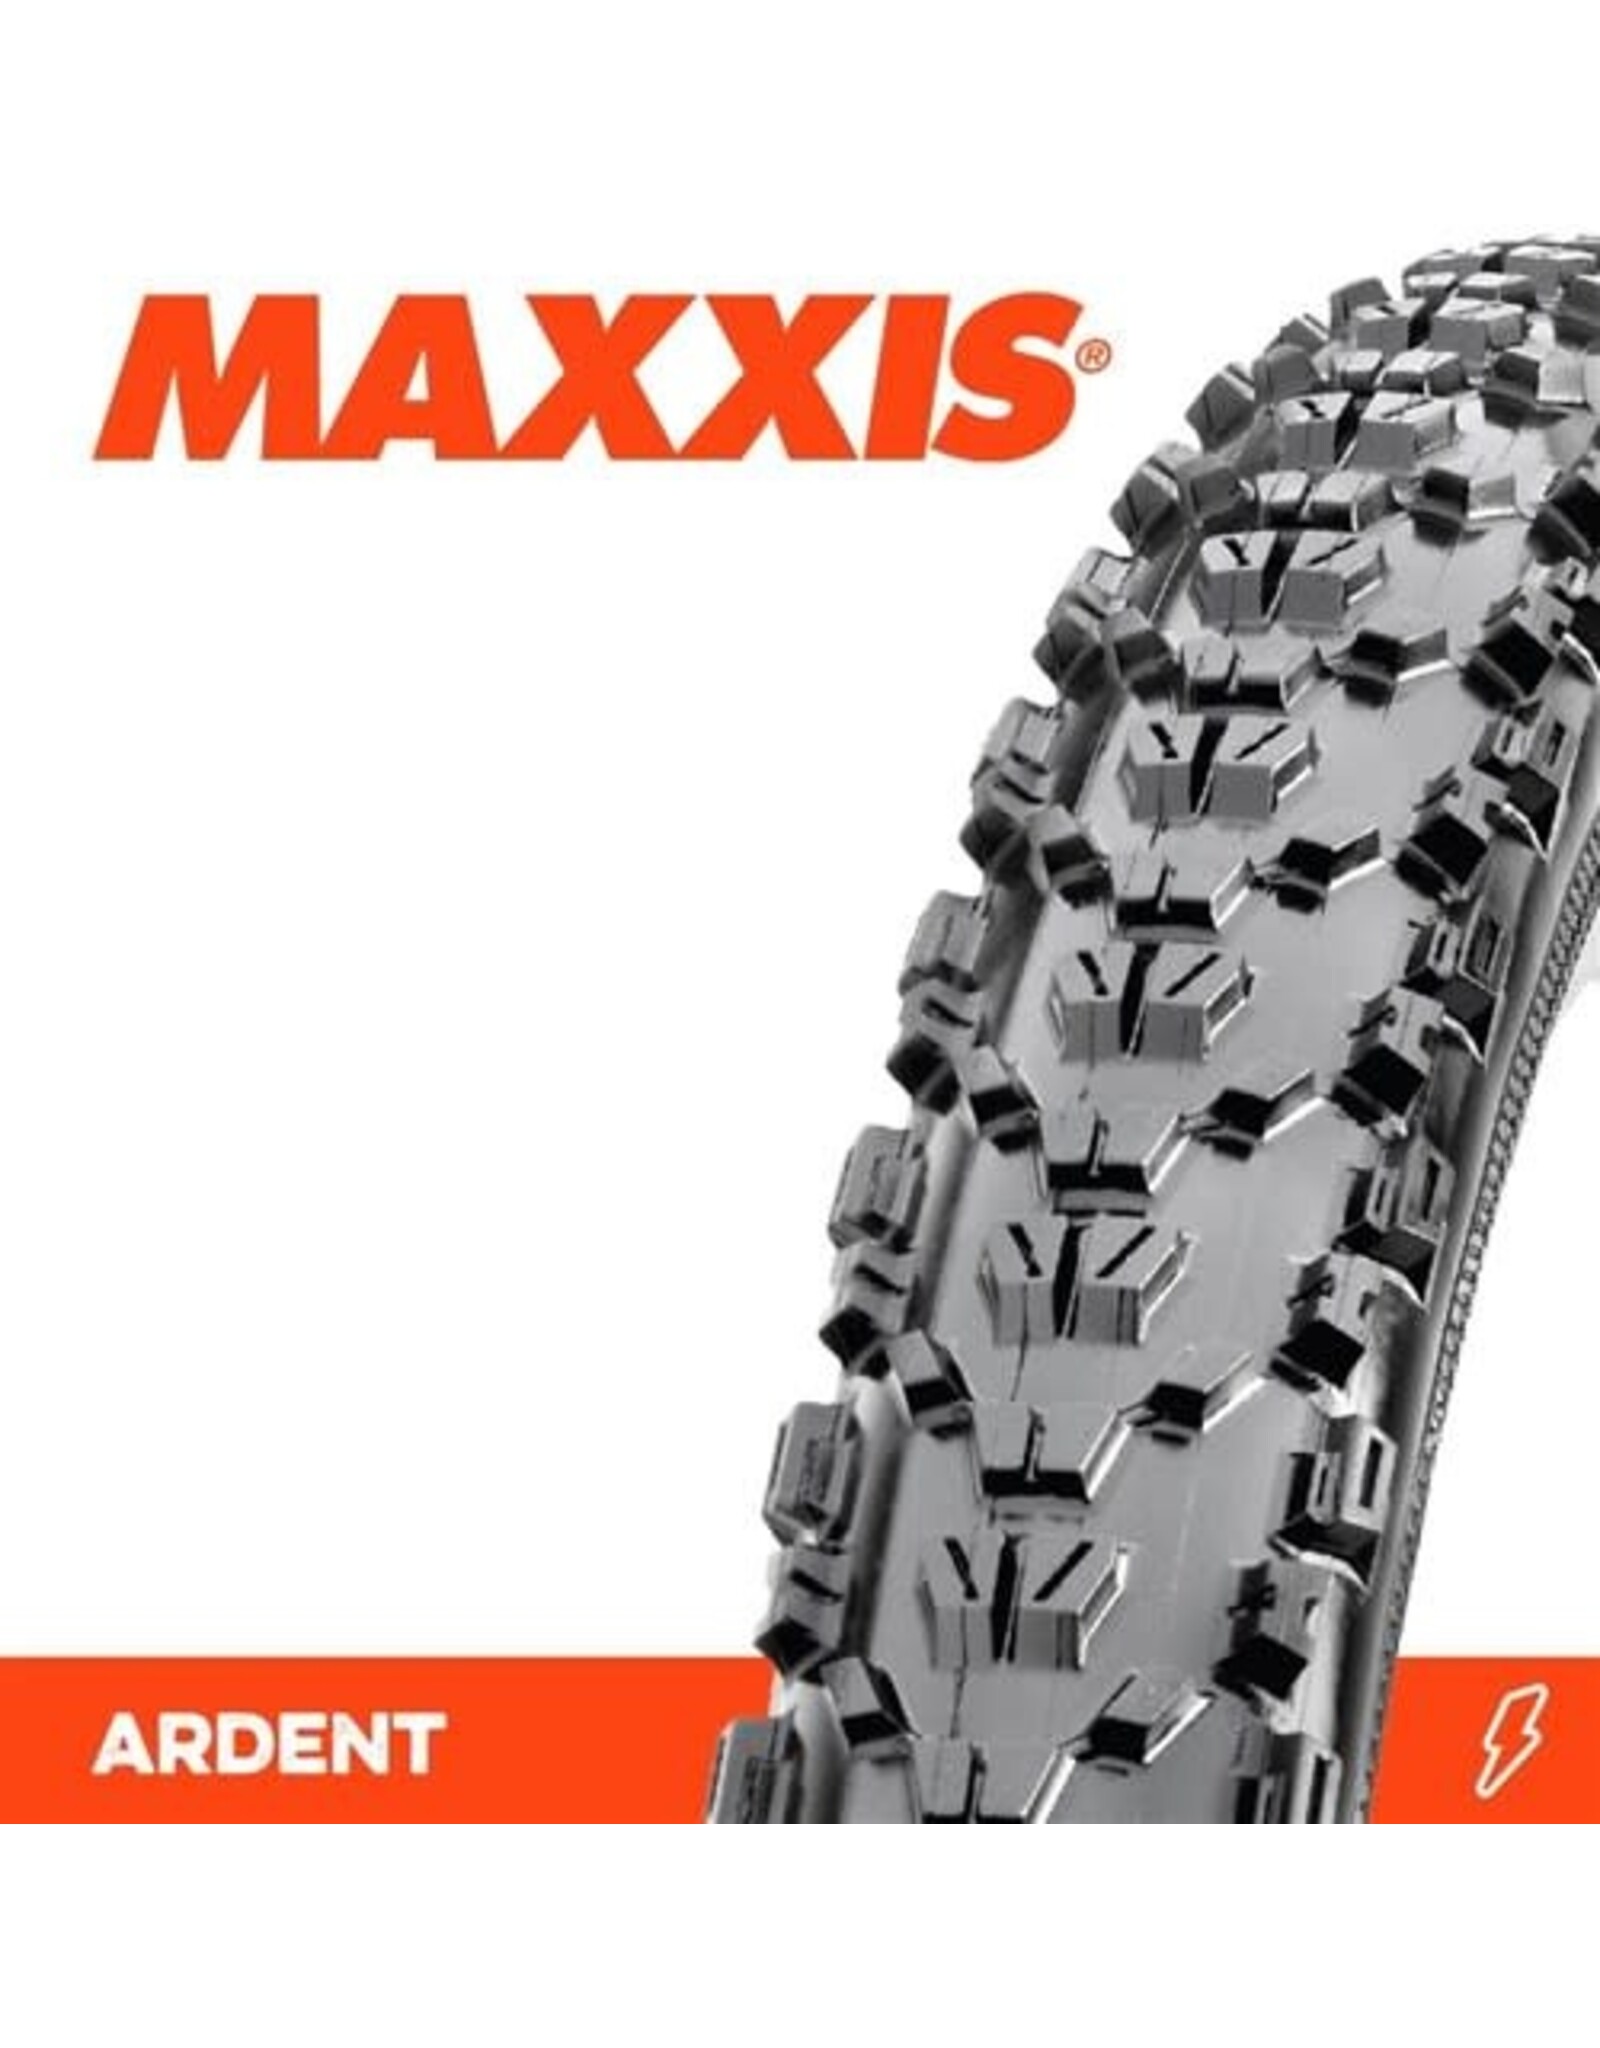 MAXXIS MAXXIS ARDENT 27.5 X 2.40” WIRE BEAD 60TPI TYRE